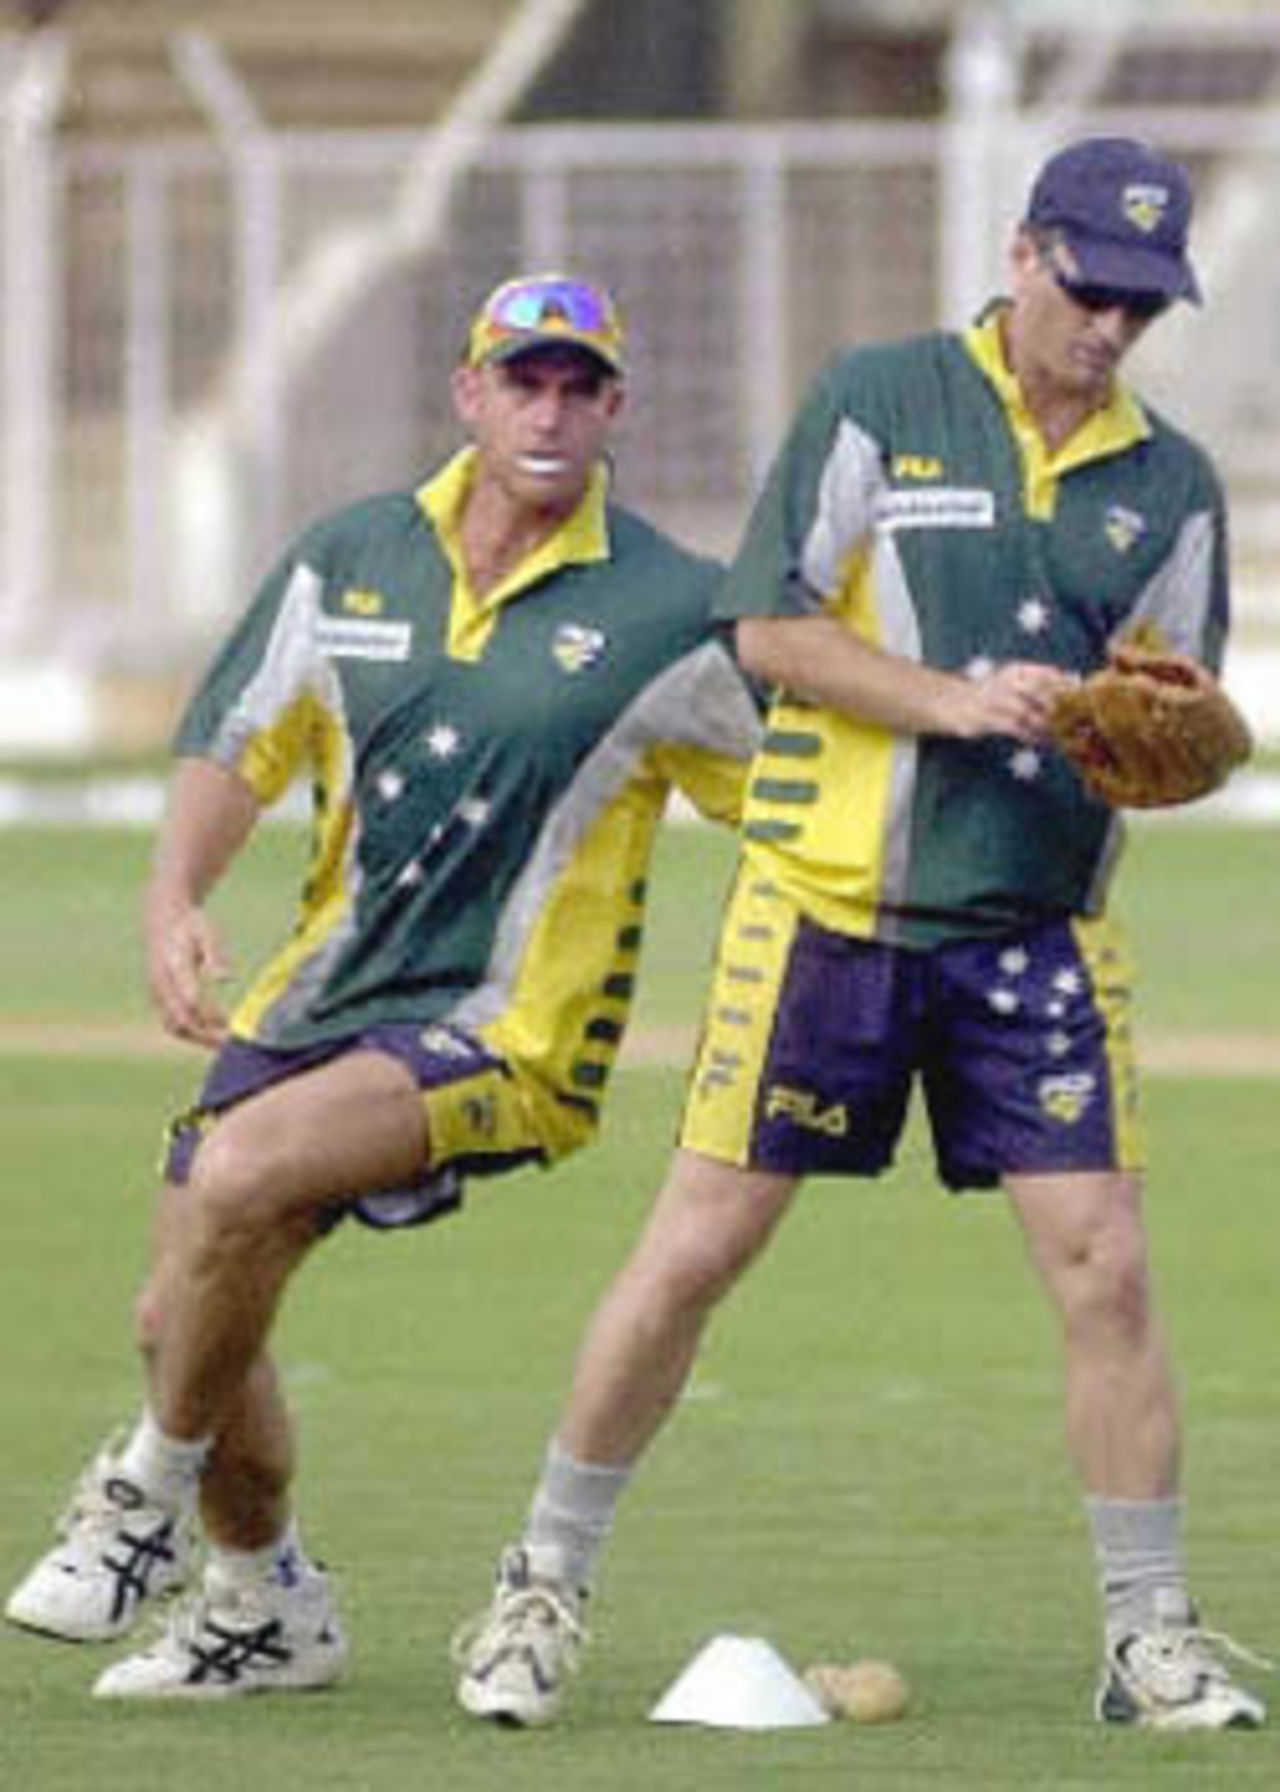 05 April 2001: The Australian team prepare for the final contest of their one-day series against India at the Nehru Stadium in Margao, Goa